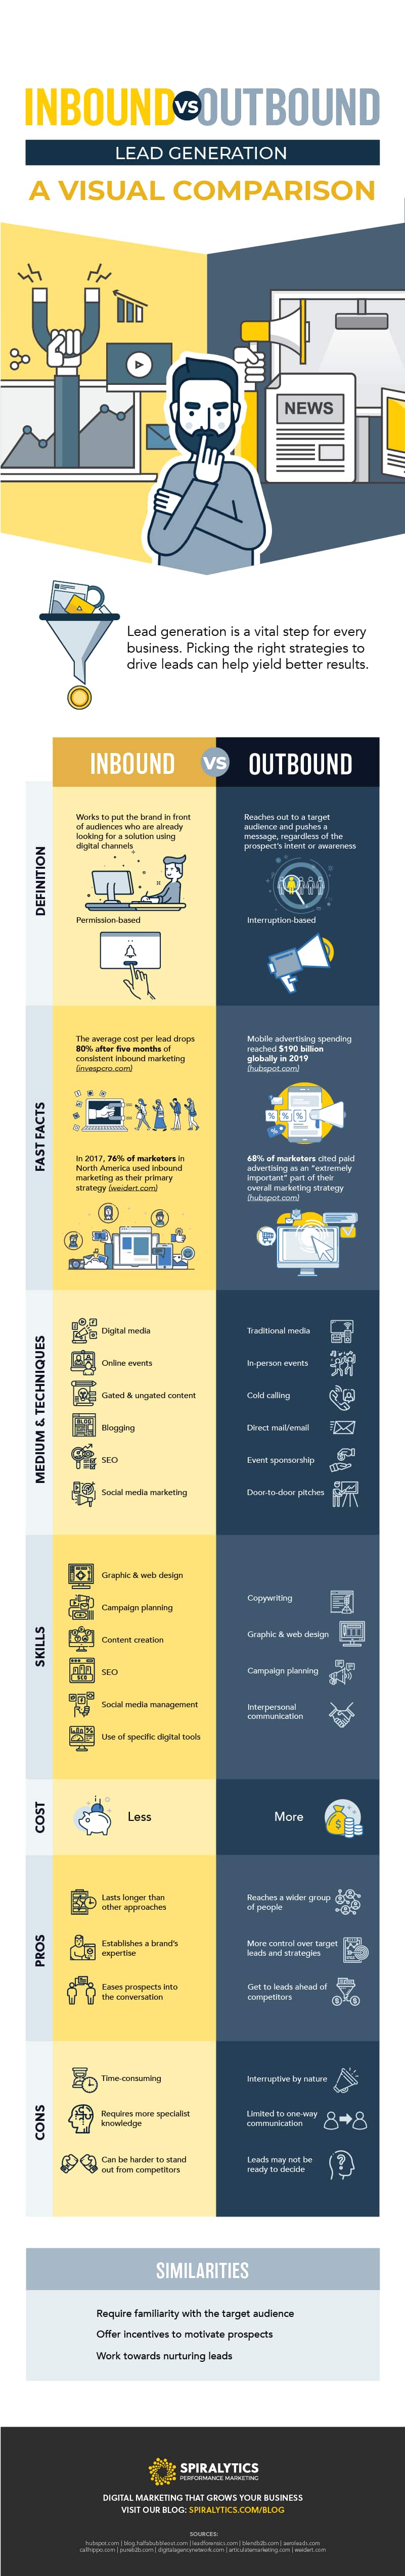 Inbound lead generation vs. outbound lead generation infographic